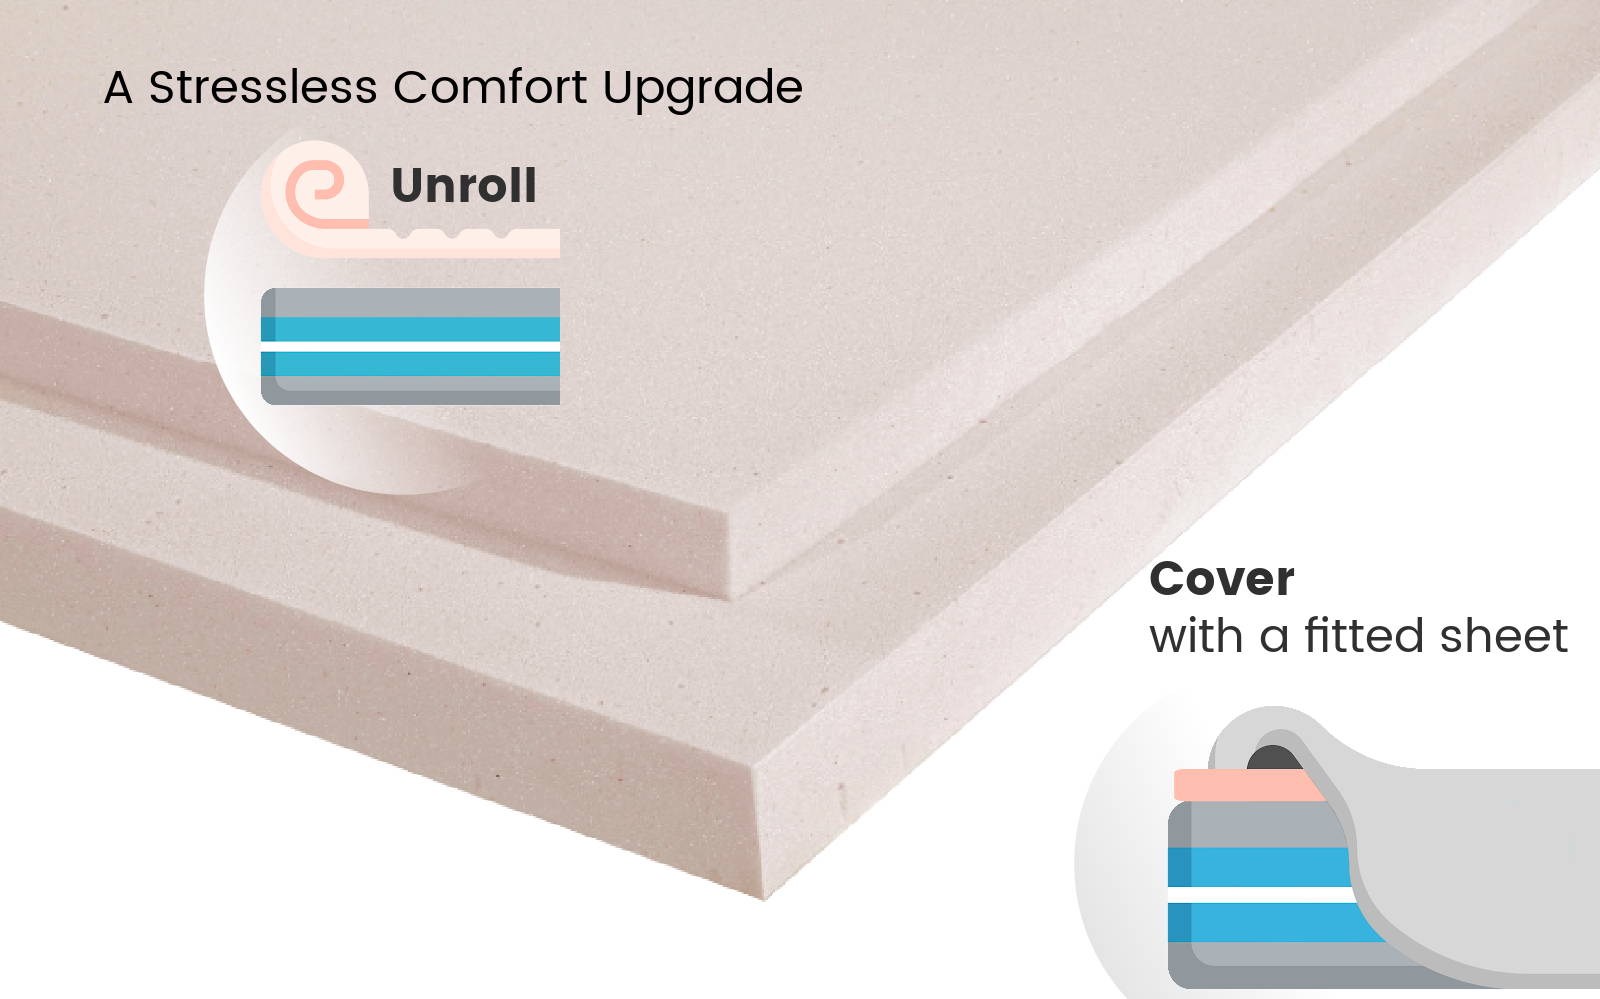 A stressless comfort upgrade with a copper topper: Just unroll and cover with your fitted sheet.